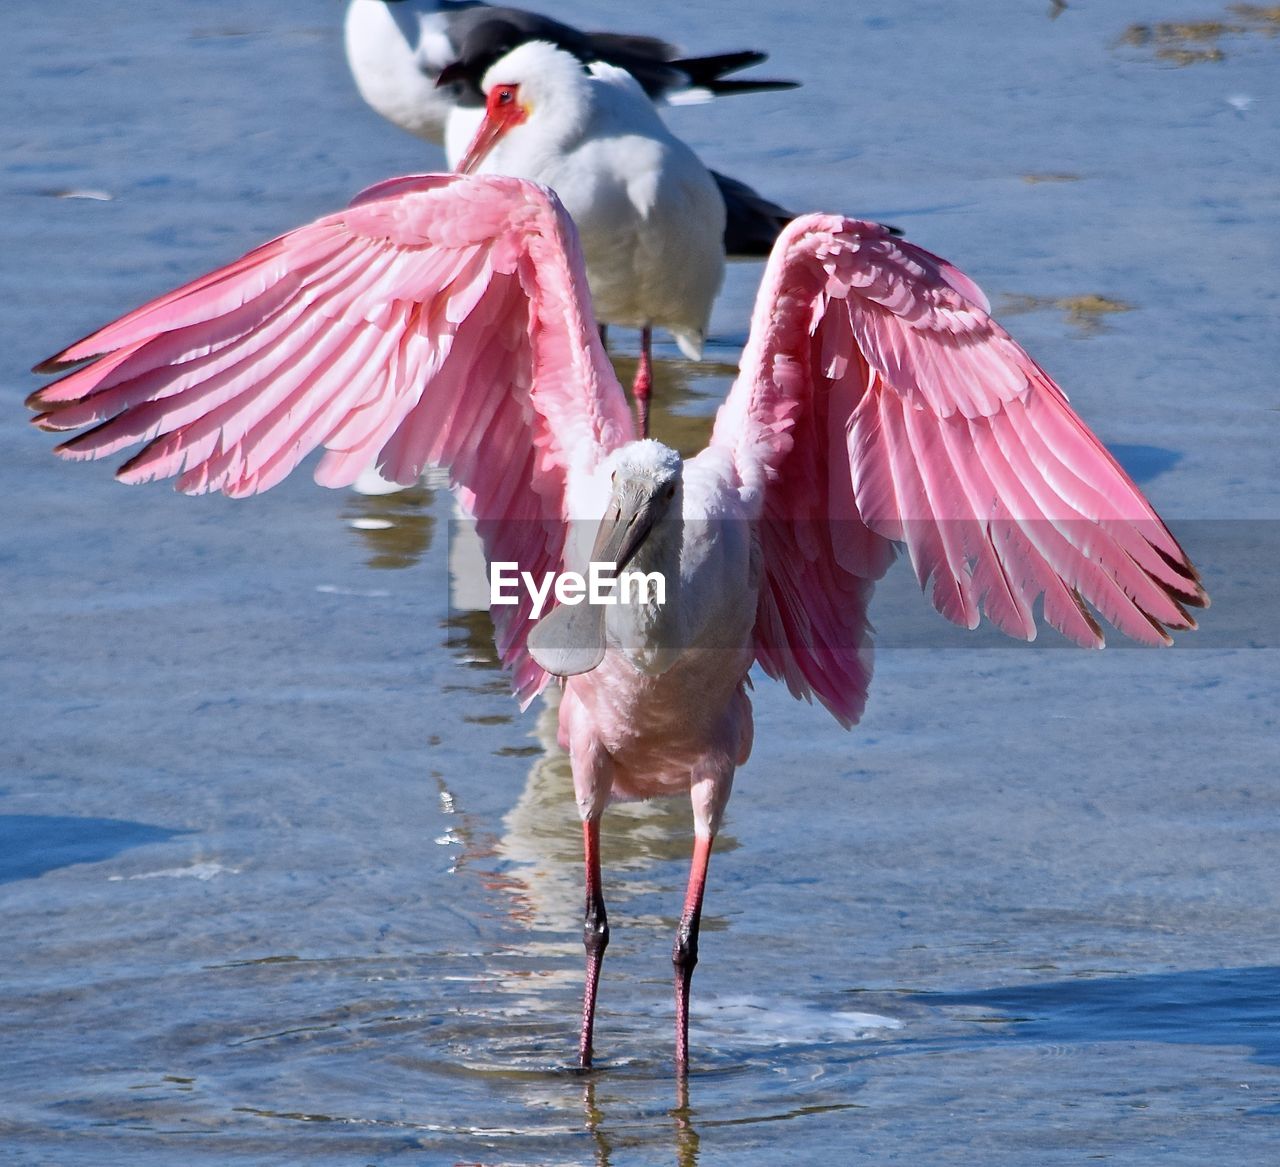 Roseate spoonbill wading in lake